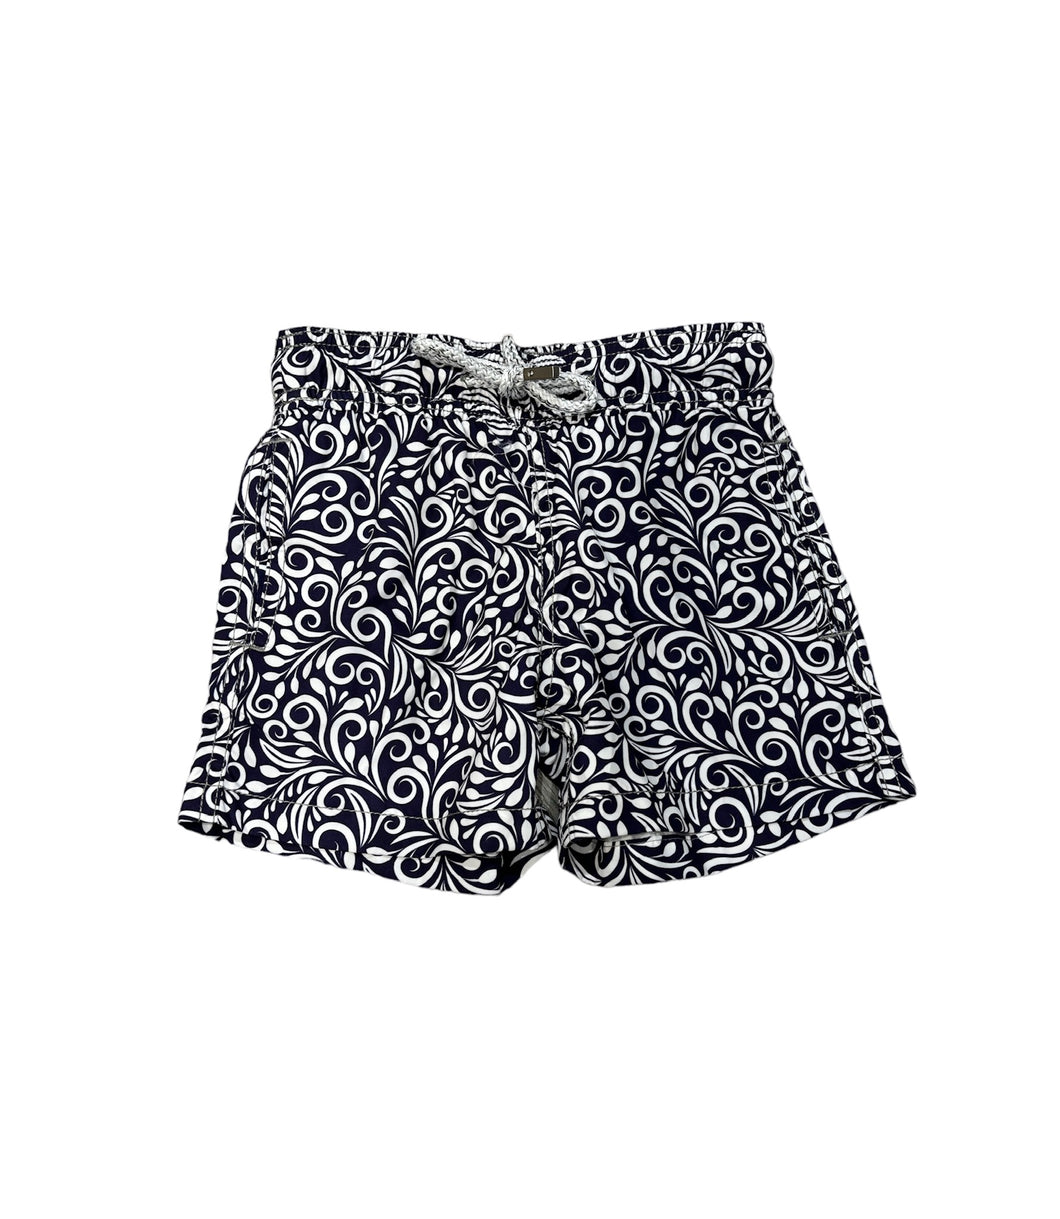 Pier st barth blue and white paisley boys trunks